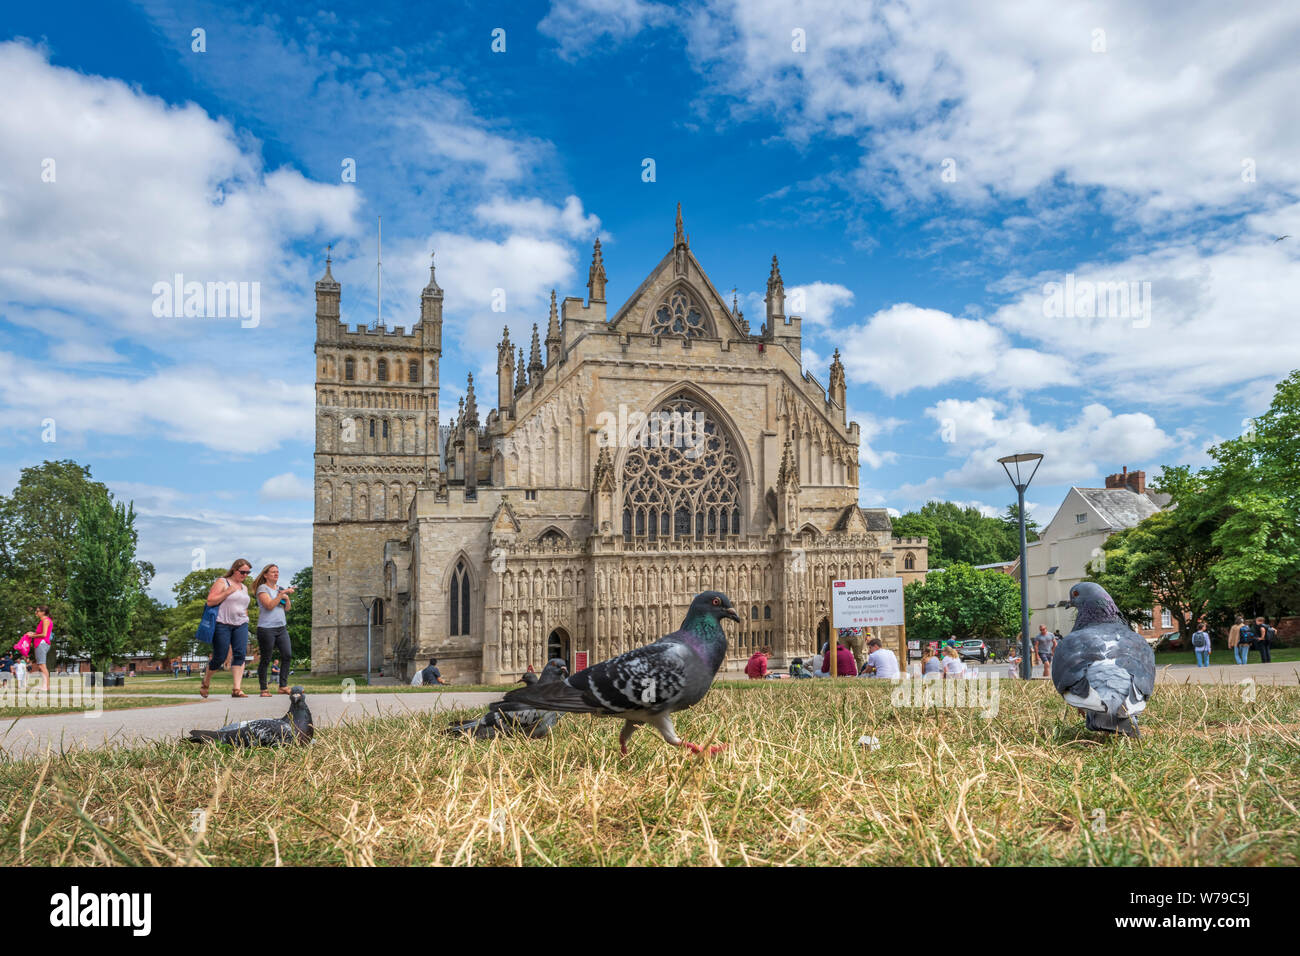 Exeter, Devon, South West England. Monday 5th August 2019. UK Weather.  People, and pigeons, enjoy the relaxed atmosphere on Cathedral Green in the centre of Exeter, on a warm day with intermittent sunshine. Credit: Terry Mathews/Alamy Live News Stock Photo